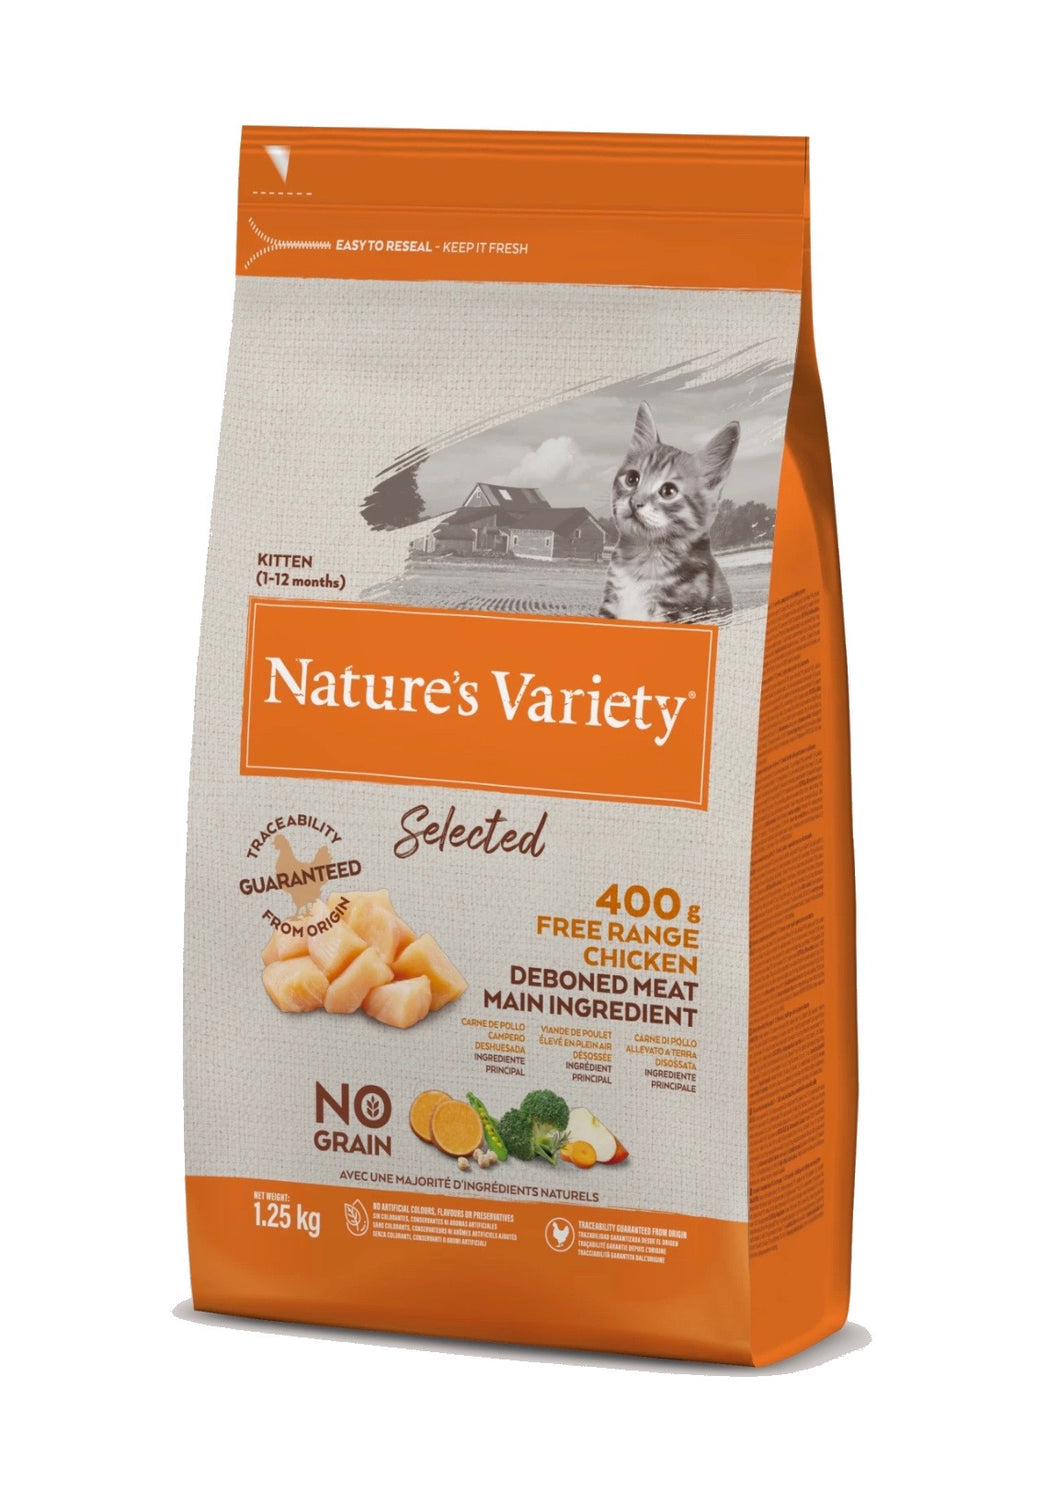 Natures Variety Kitten Selected Chicken 1.25kg